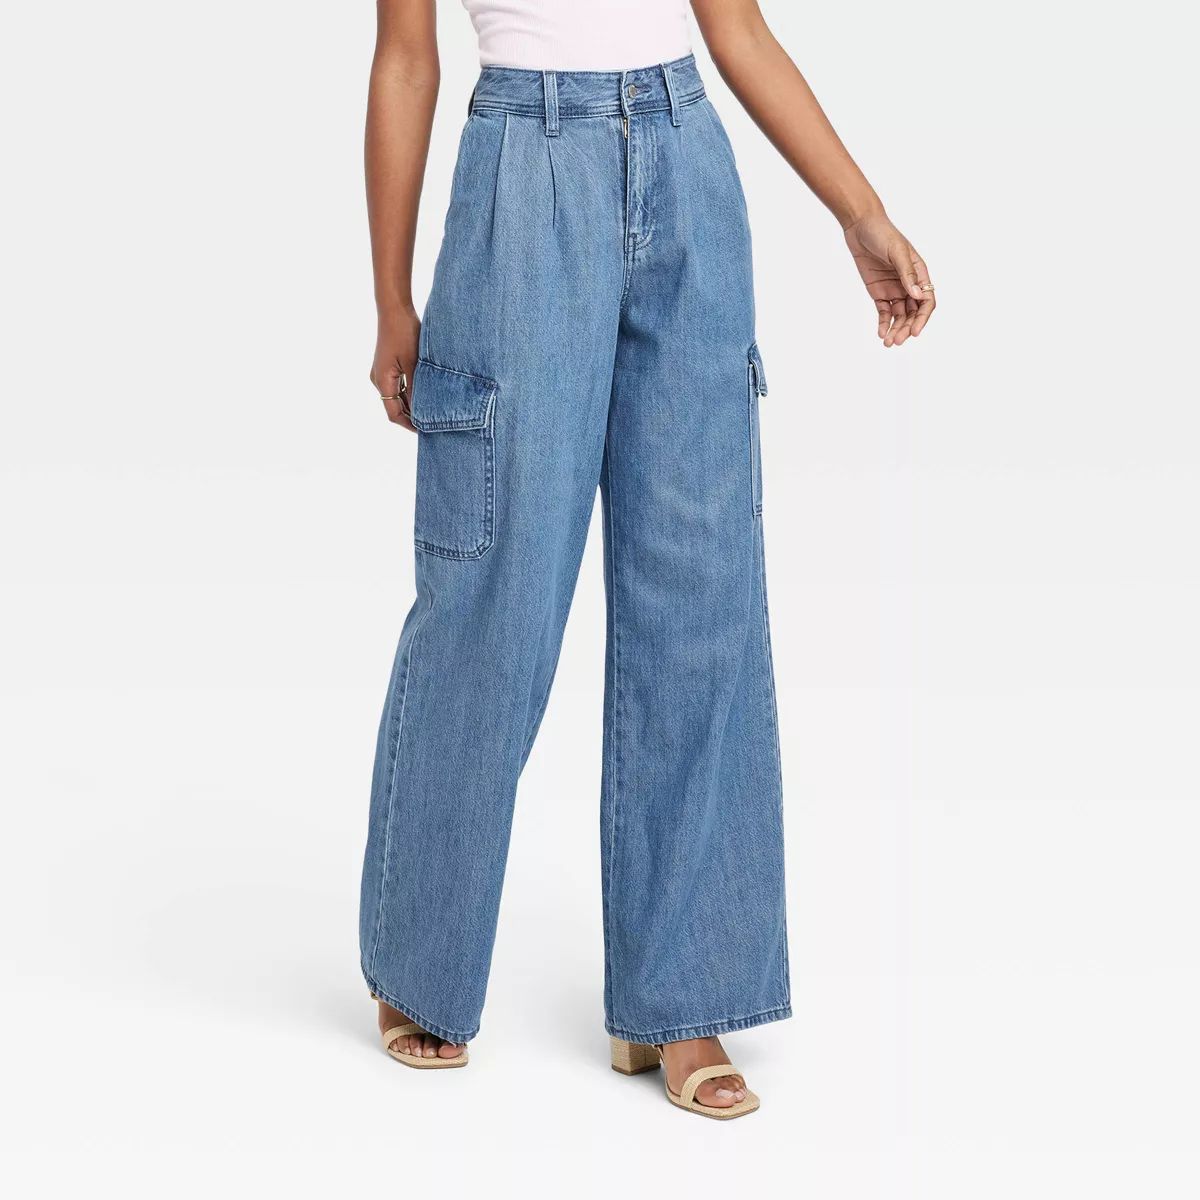 TargetClothing, Shoes & AccessoriesYoung Adult ClothingDenim Dressing | Target